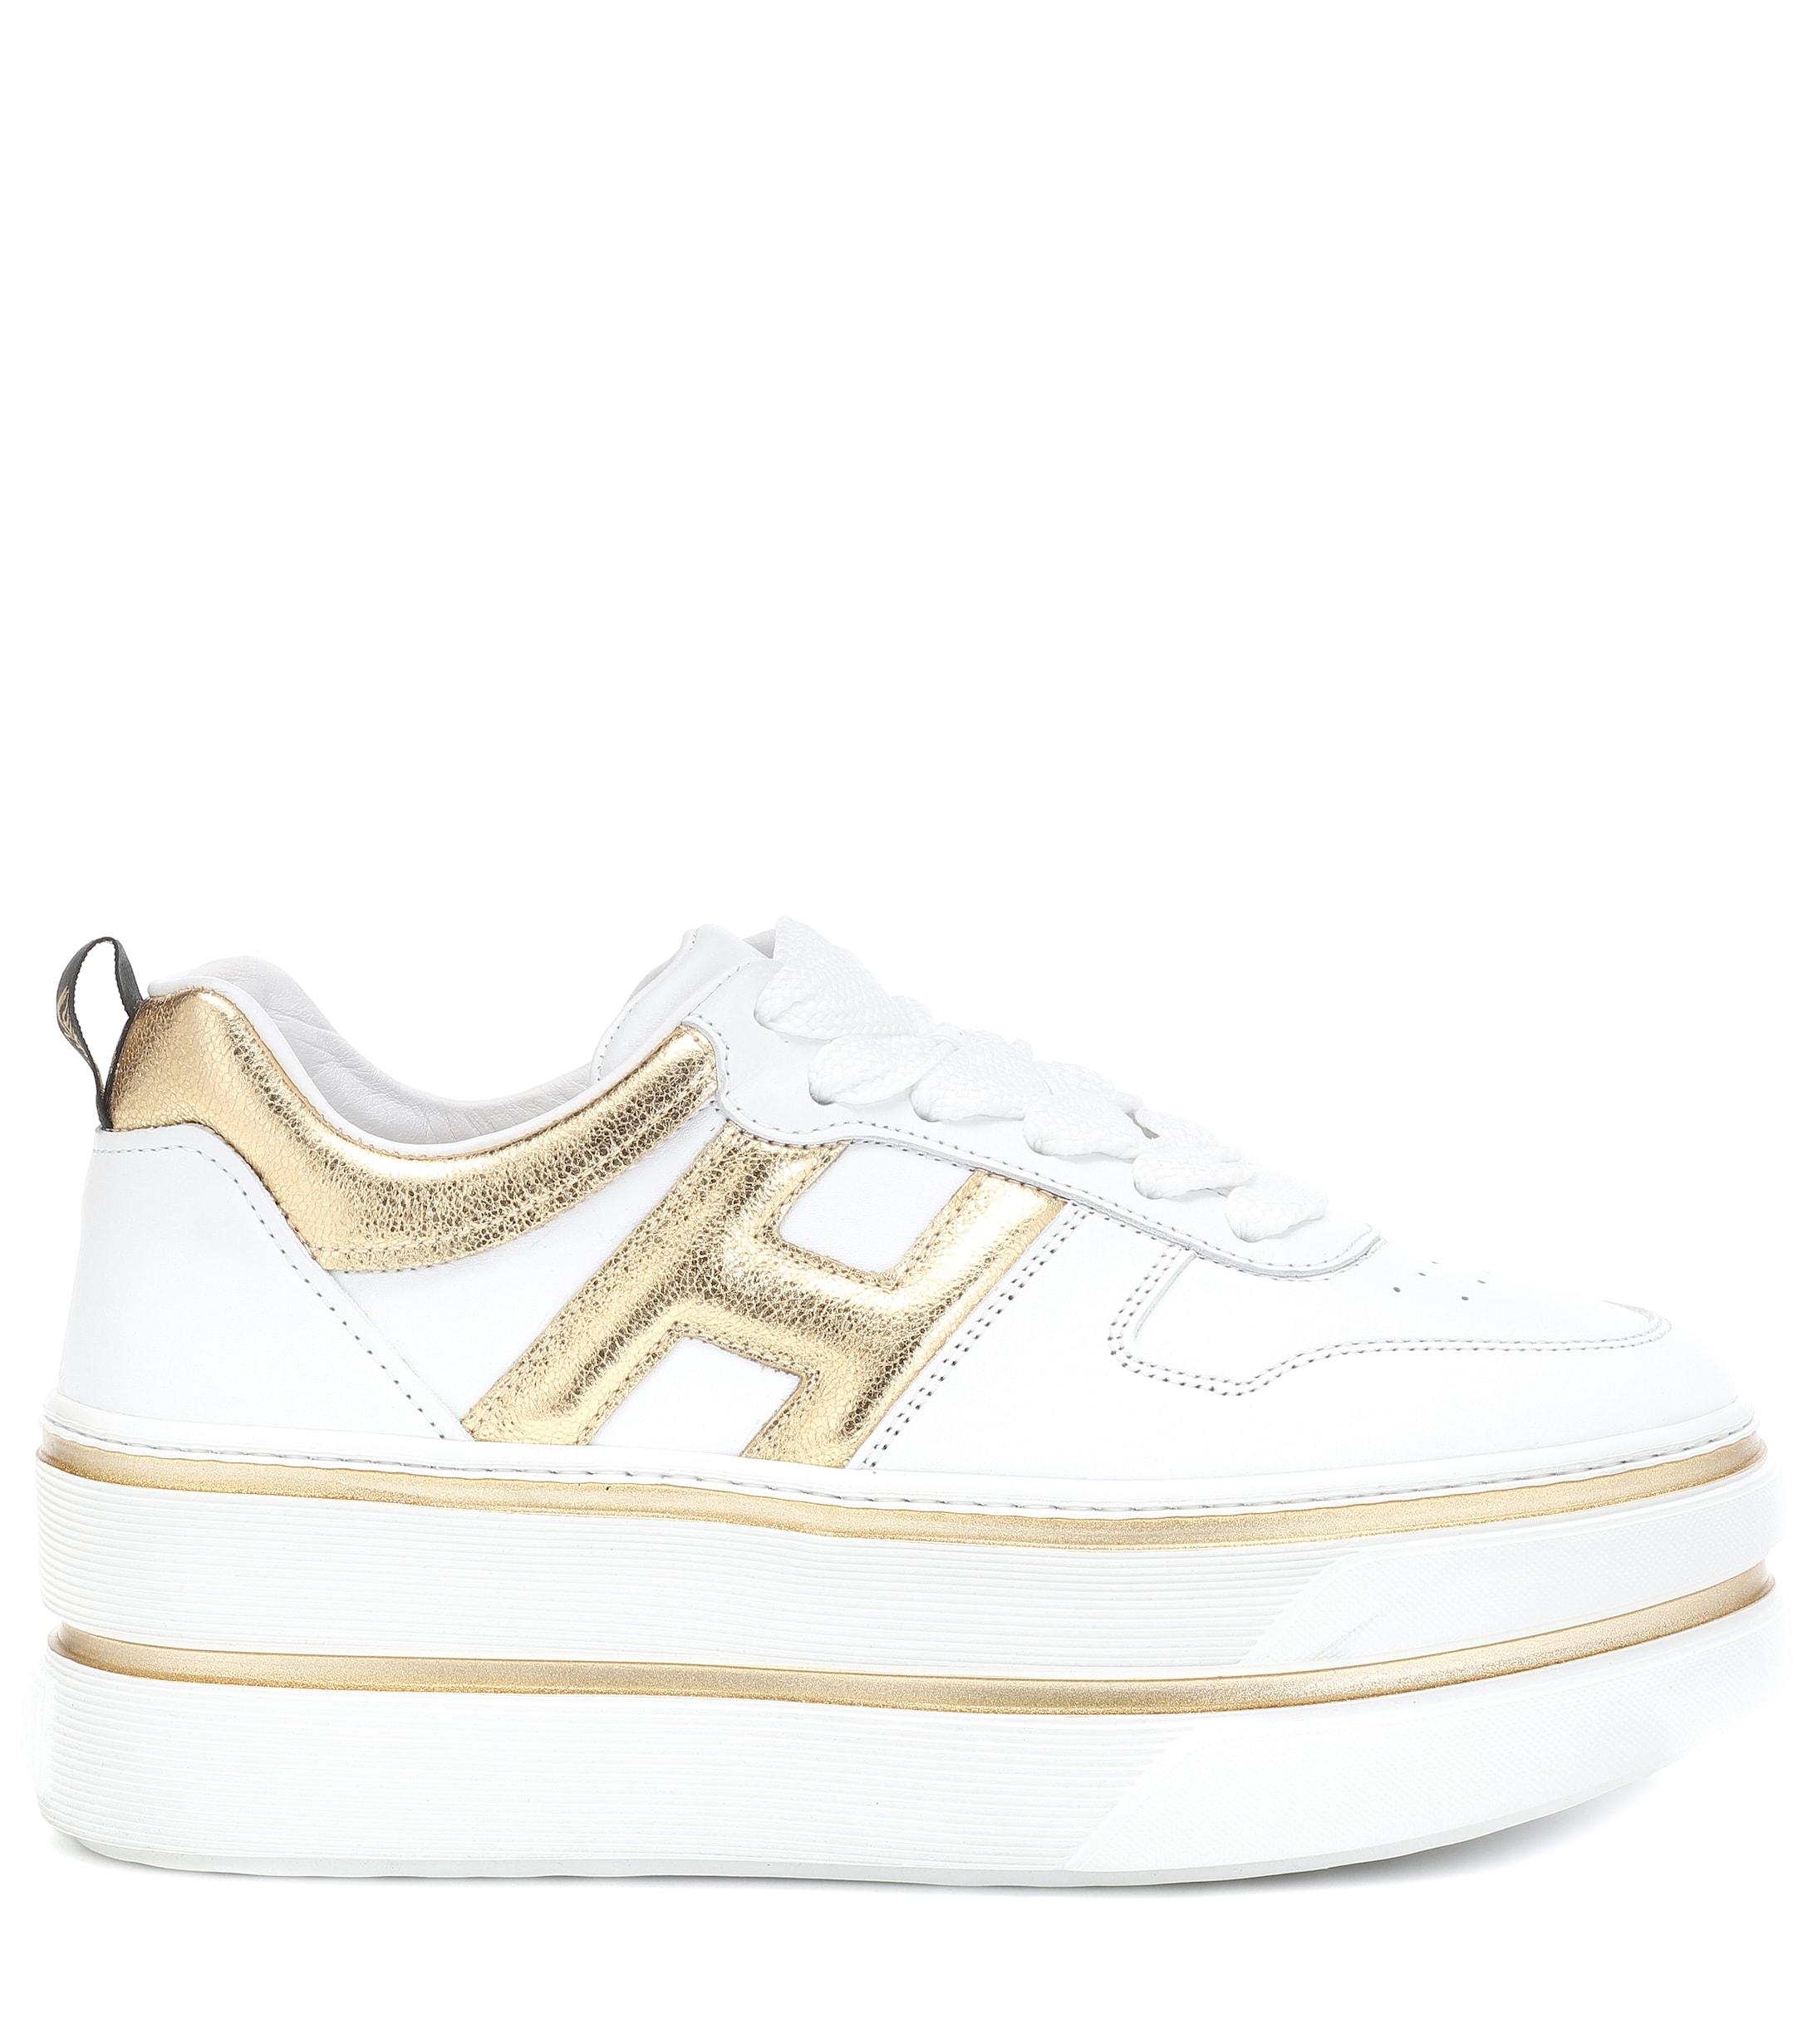 Hogan H449 Leather Platform Sneakers in White | Lyst